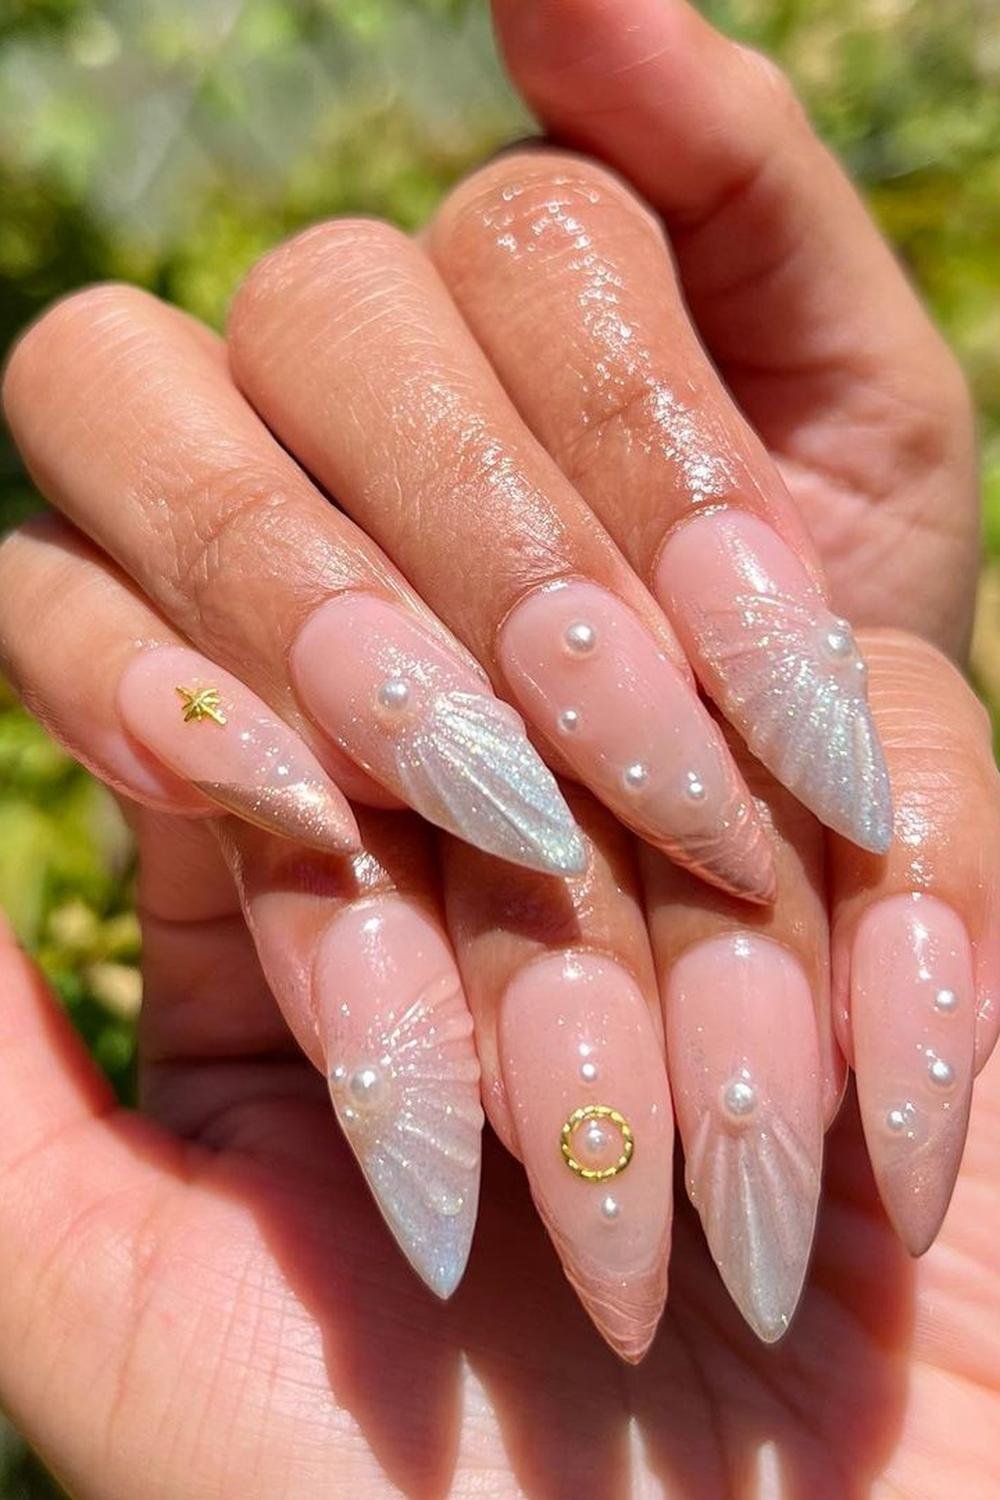 44 - Picture of Mermaid Nails